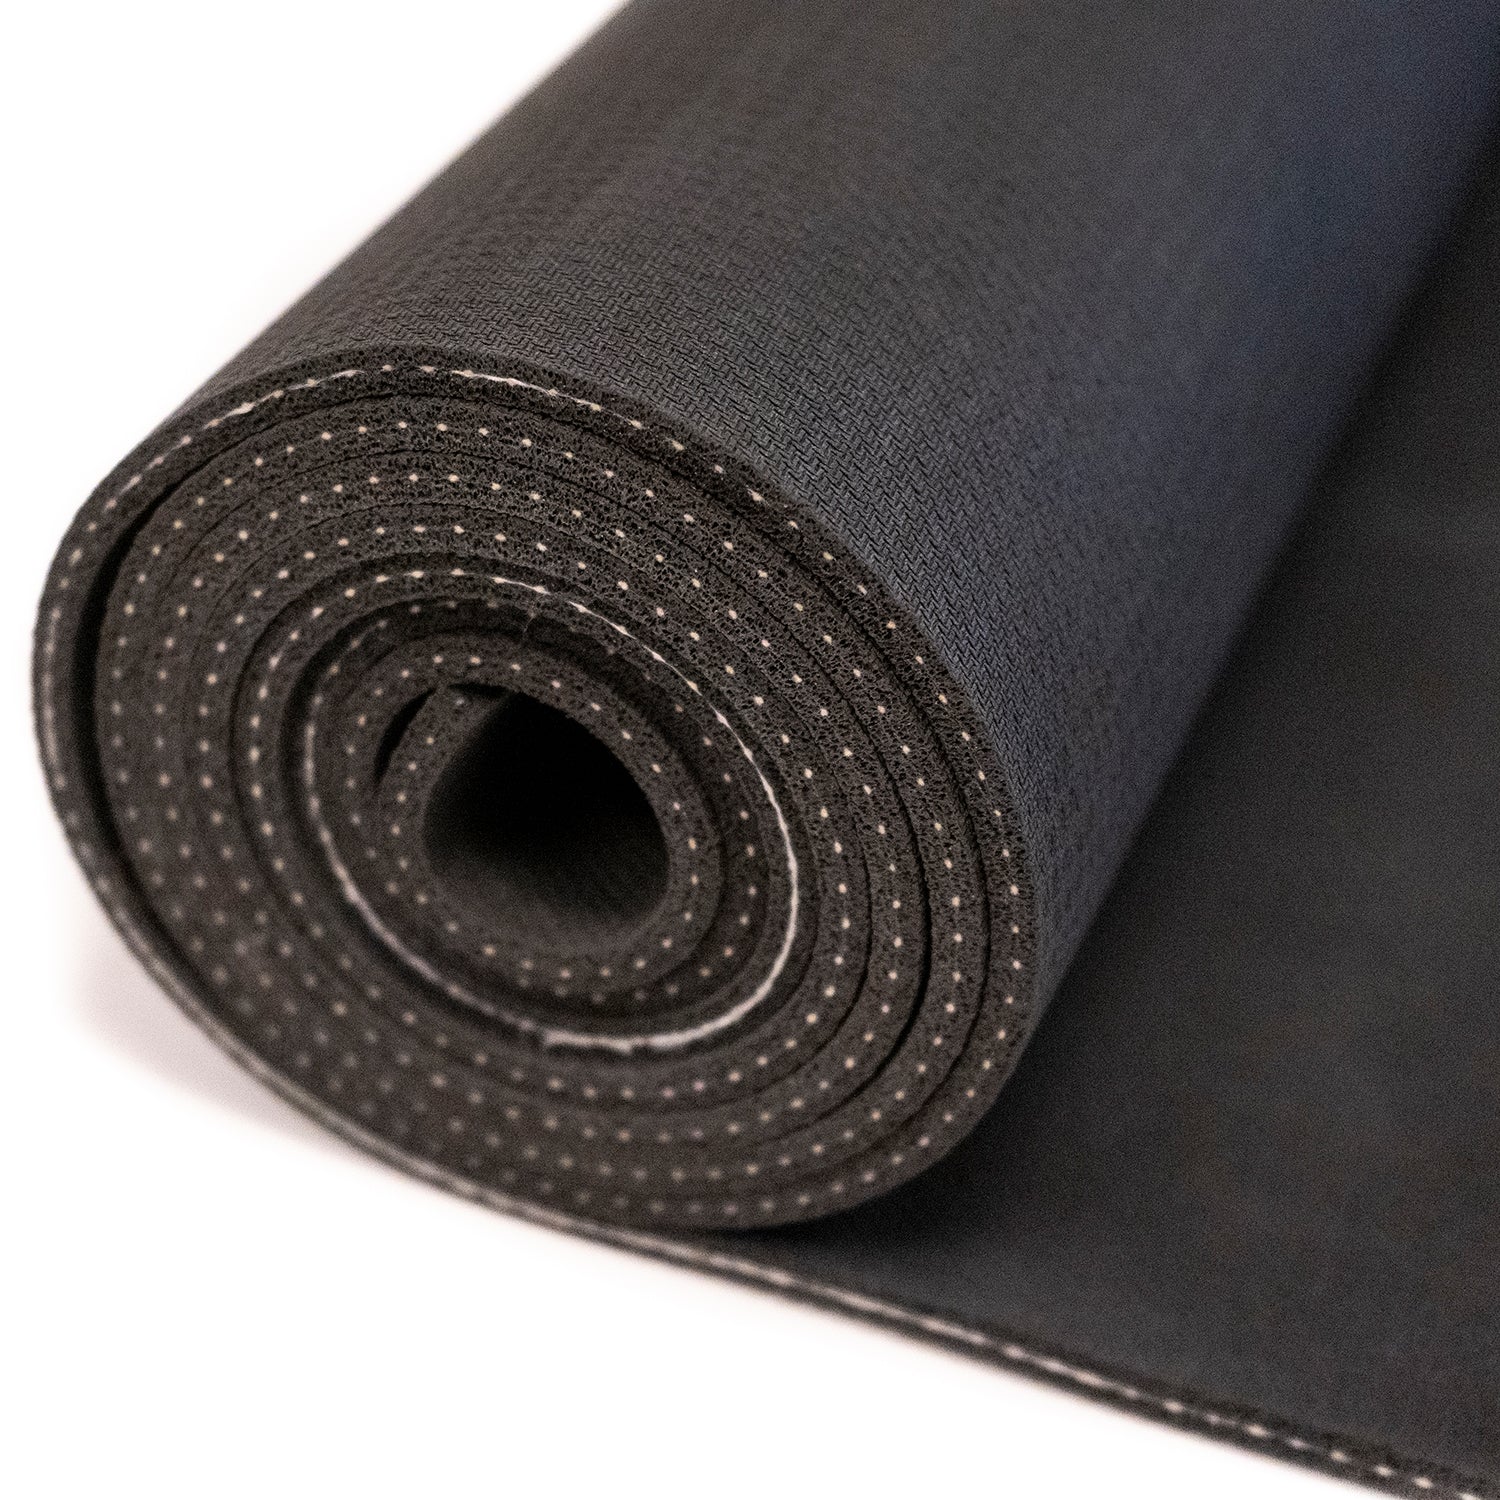 Natural Rubber Yoga Mat by YOGA Accessories